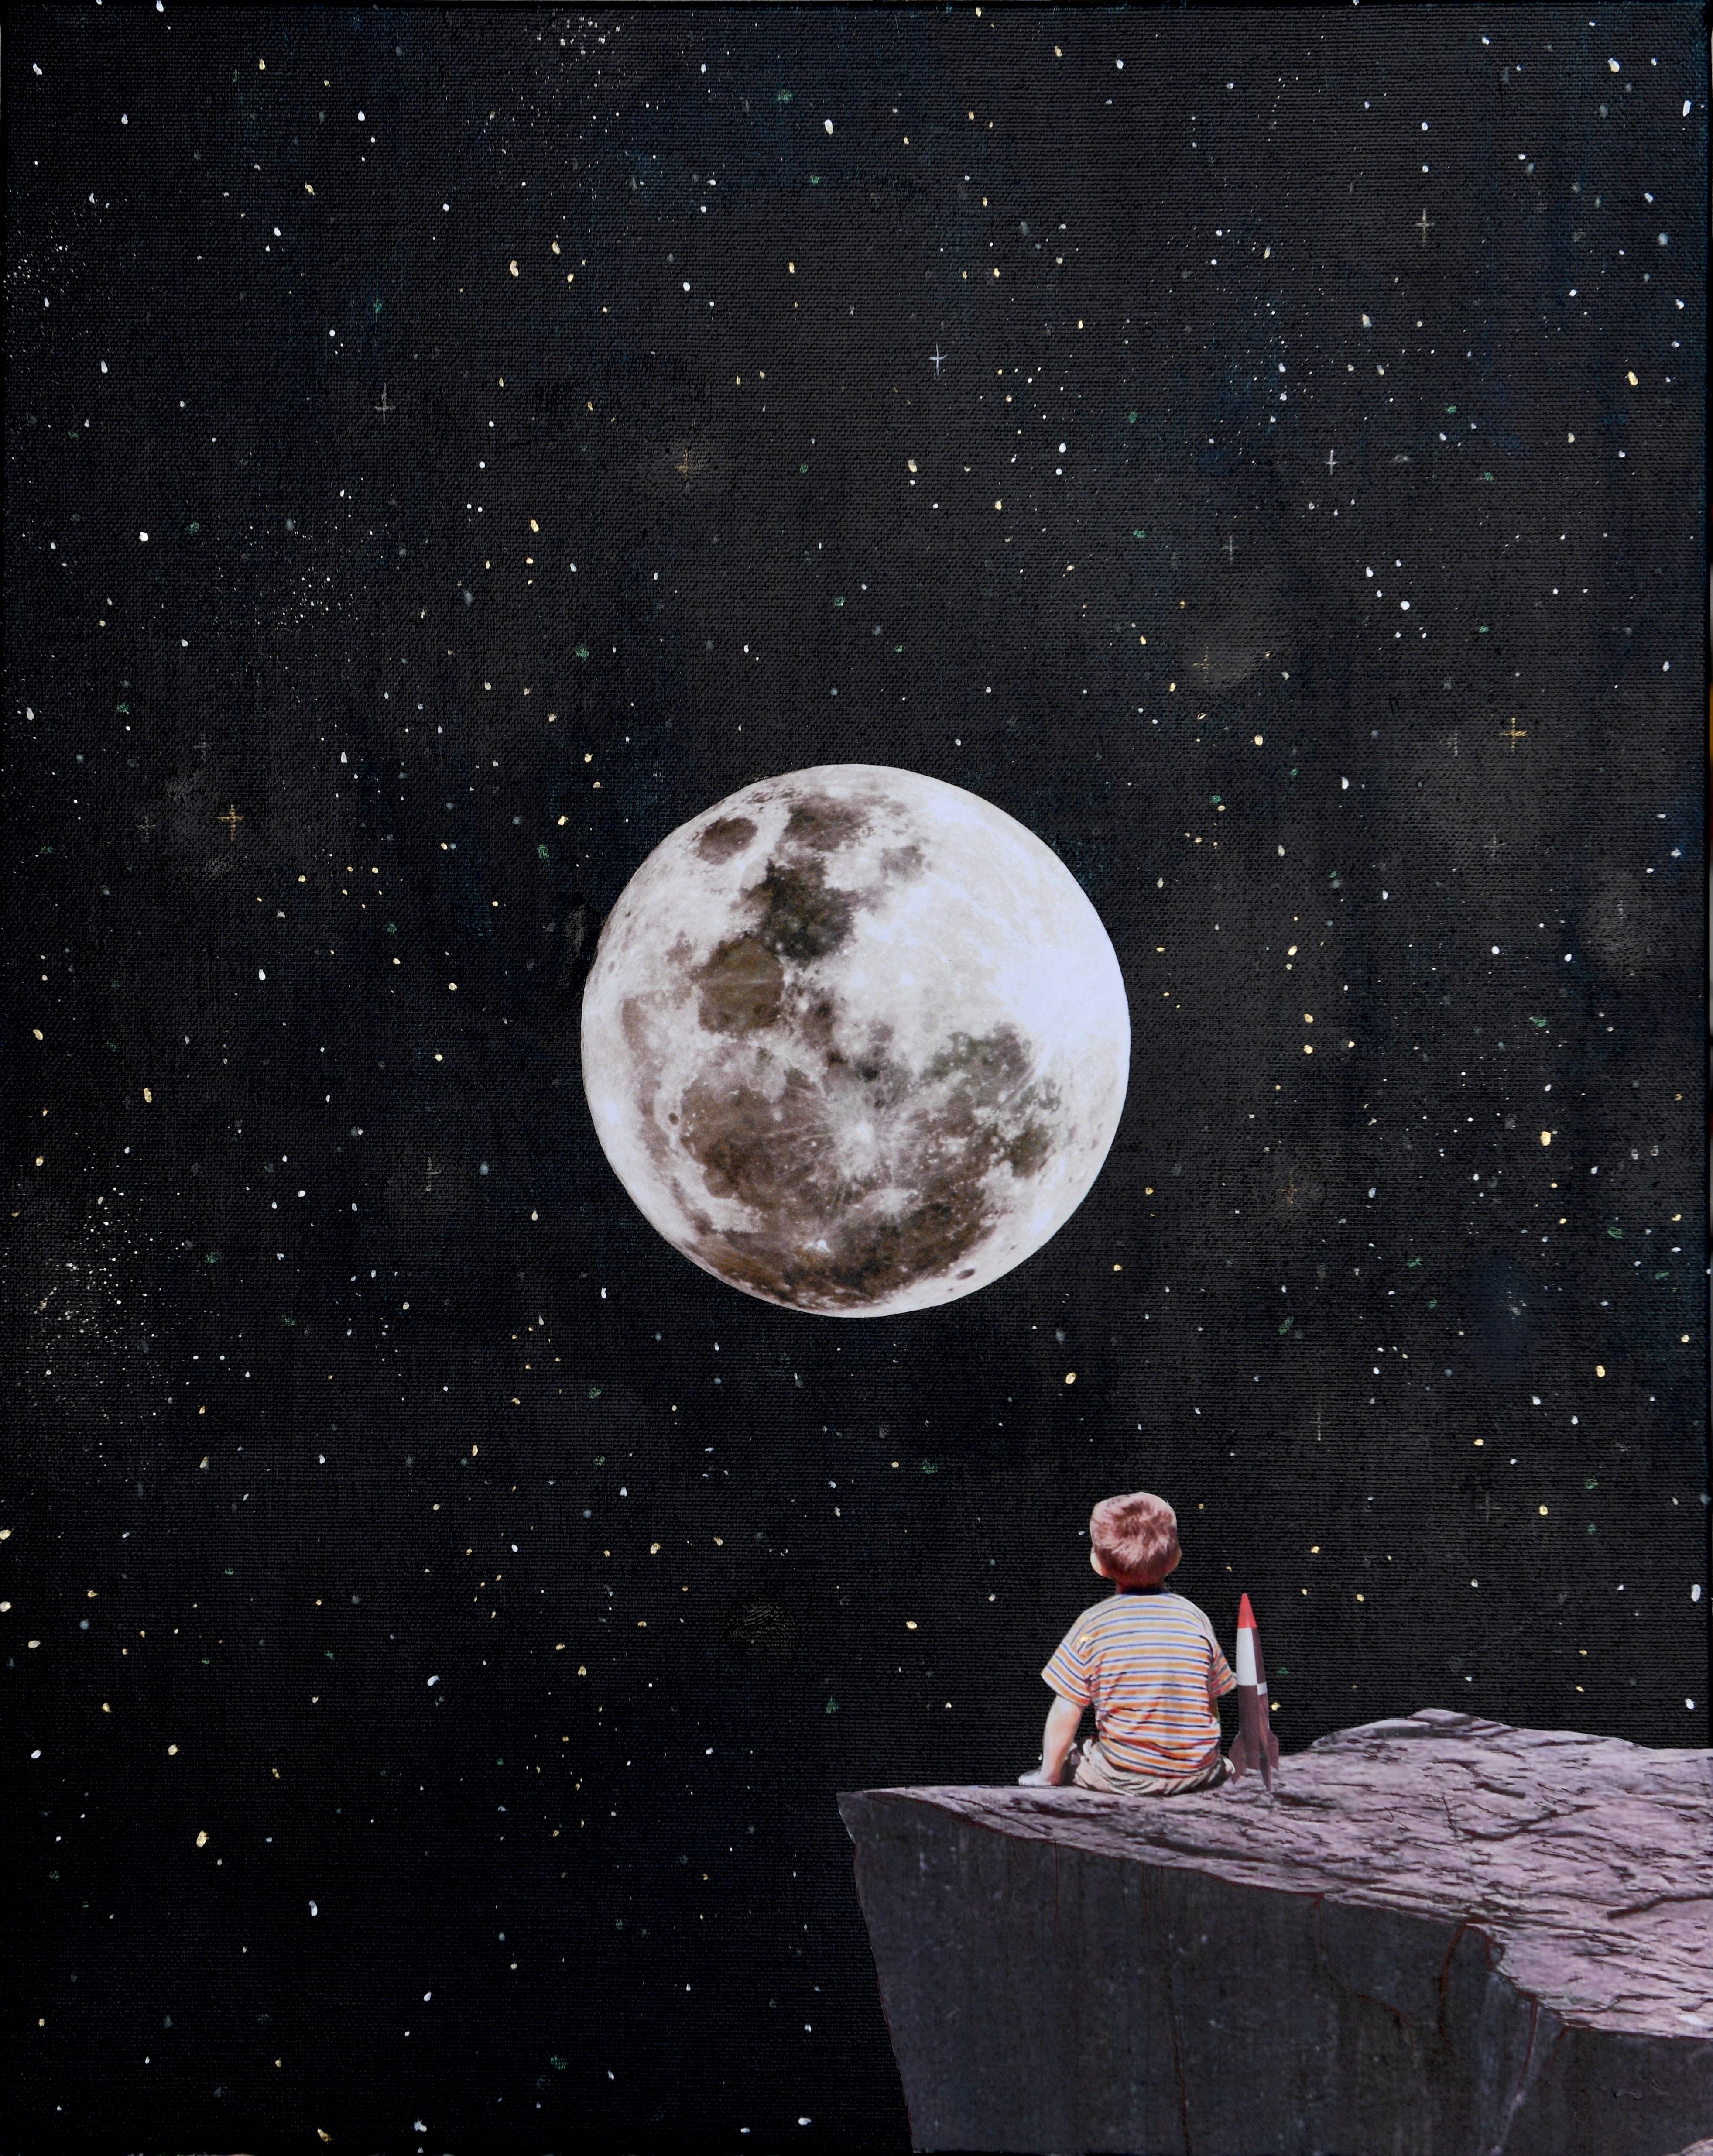 Launch - Little Boy Looking at a Full Moon Under the Stars, Glow In The Dark - Mixed Media Art by Veronica Green